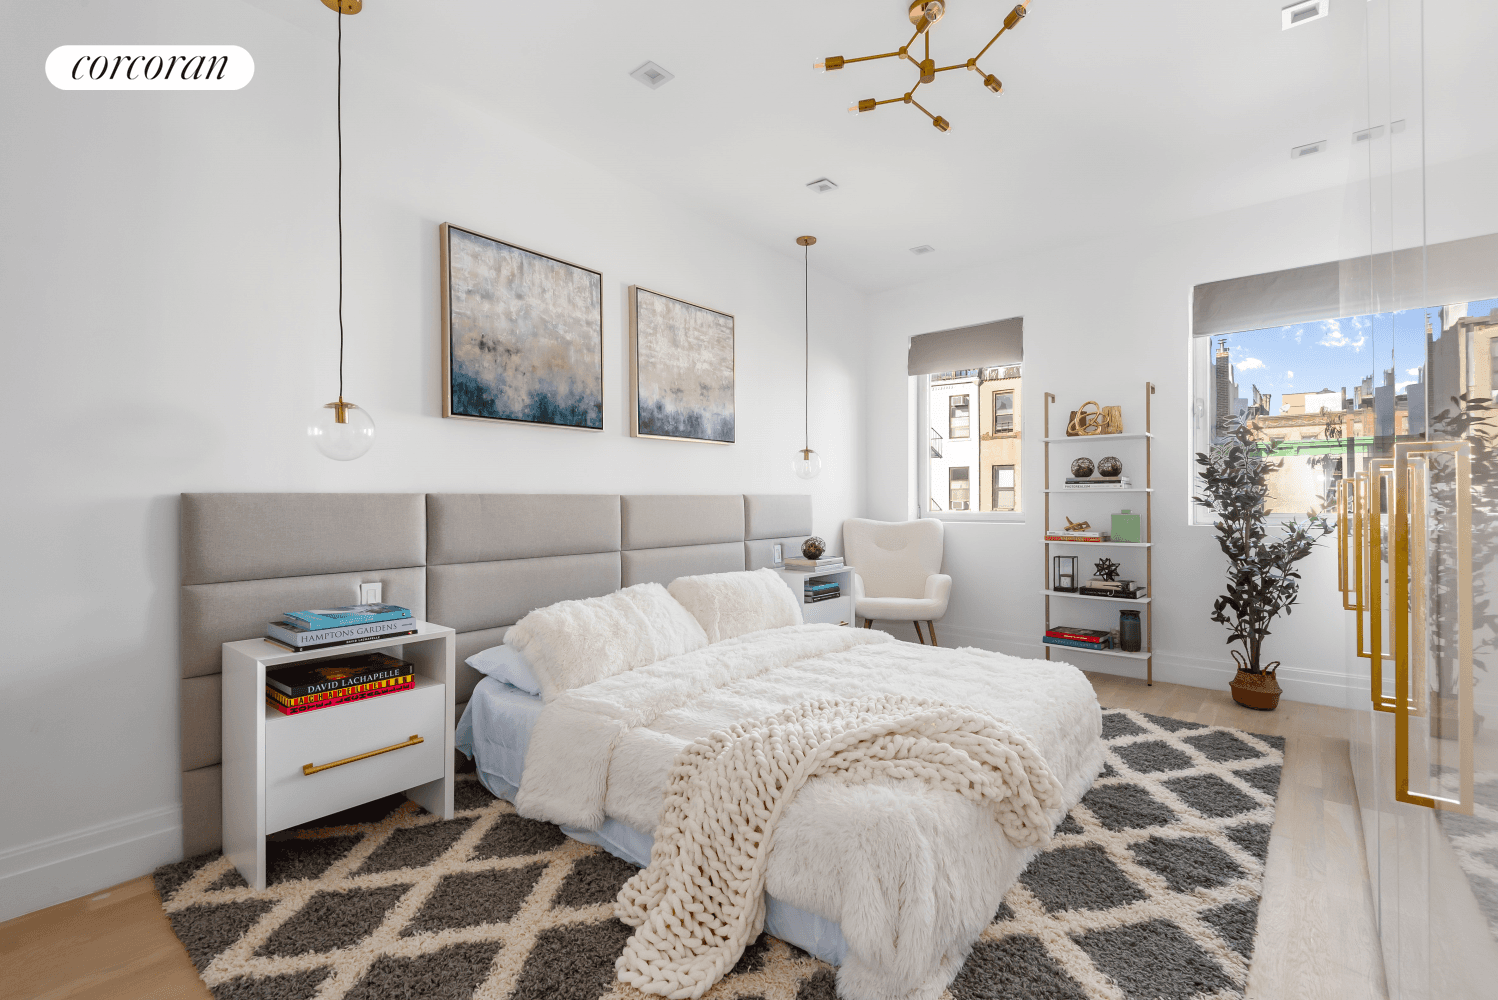 Introducing the brand new Dupont Plaza Condominiums, where sophisticated urban living meets thoughtful and spacious layouts in Greenpoint, Brooklyn.